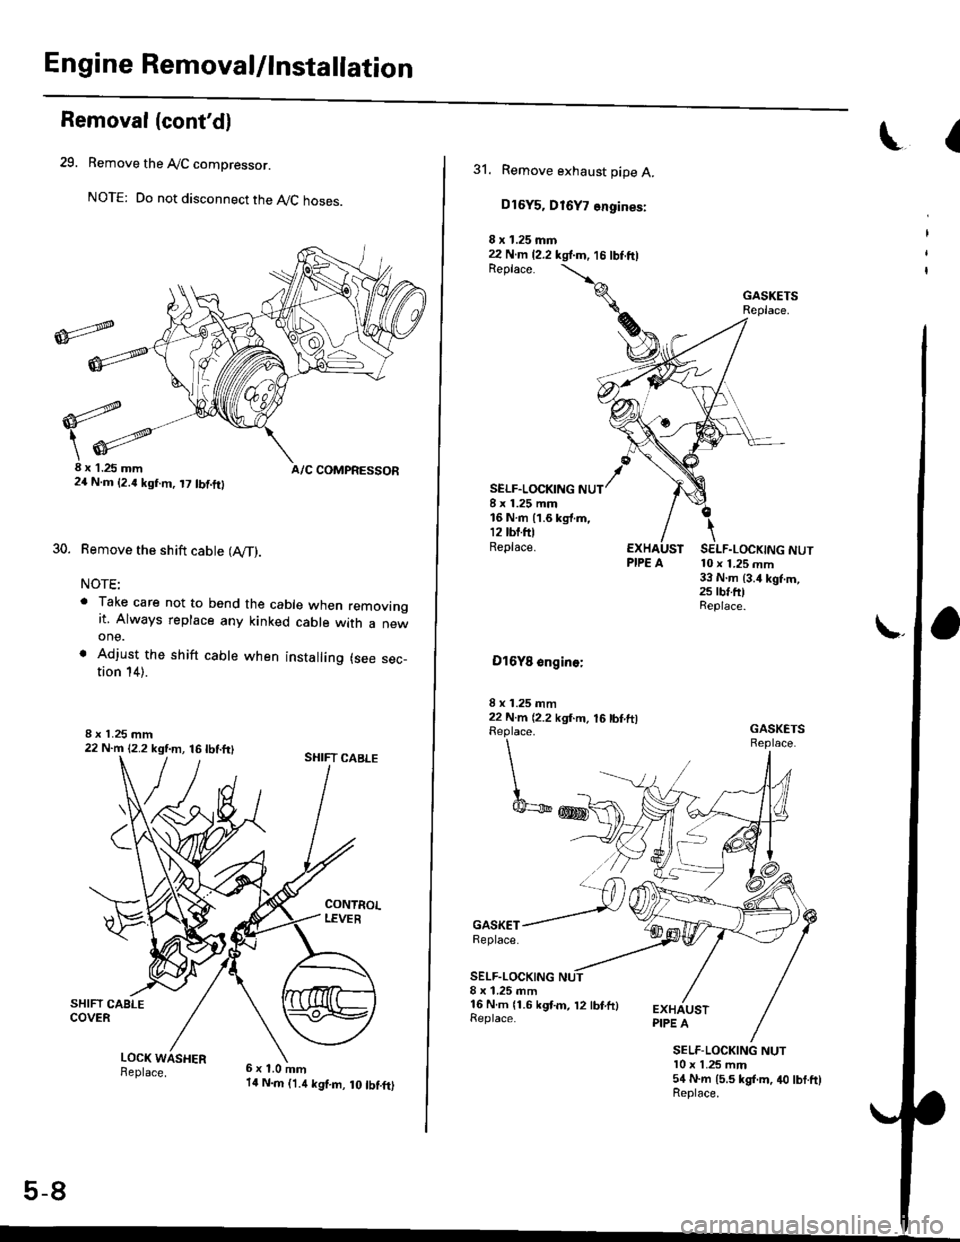 HONDA CIVIC 1996 6.G Workshop Manual Engine Removal/lnstallation
Removal(contdl
29. Remove the AyC compressor.
NOTE: Do not disconnect the AyC hoses.
30.
8x 1.25 mm A/C COMPRESSOR24 N.m (2.{ kgf.m, t7 tbtft}
Remove the shift cable (IV